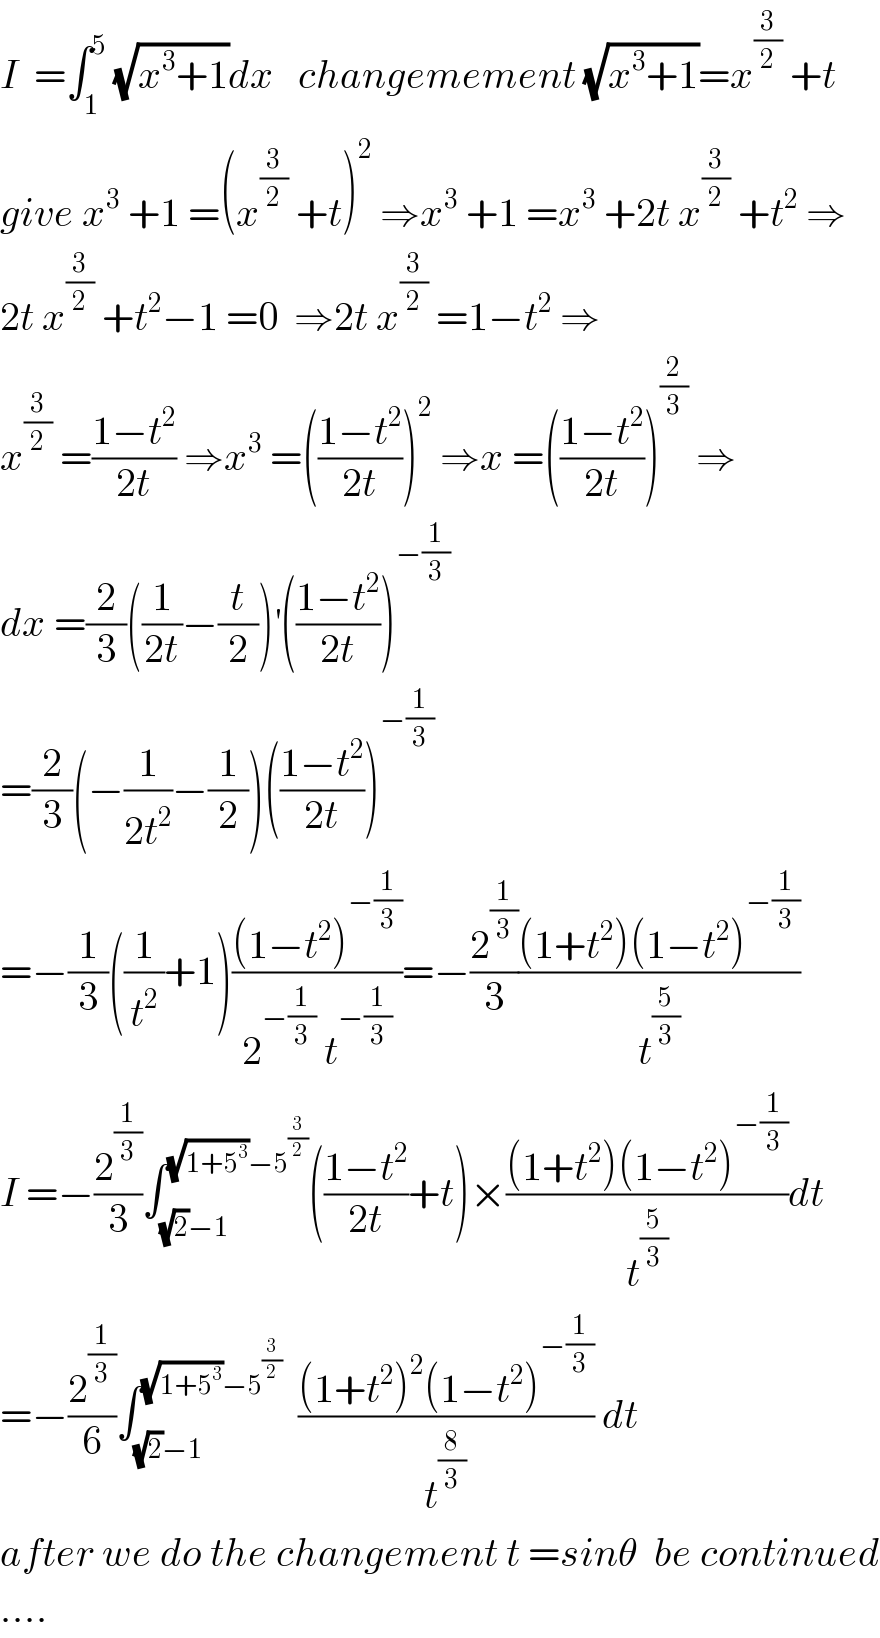 I  =∫_1 ^5  (√(x^3 +1))dx   changemement (√(x^3 +1))=x^(3/2)  +t  give x^3  +1 =(x^(3/2)  +t)^2  ⇒x^3  +1 =x^3  +2t x^(3/2)  +t^2  ⇒  2t x^(3/2)  +t^2 −1 =0  ⇒2t x^(3/2)  =1−t^2  ⇒  x^(3/2)  =((1−t^2 )/(2t)) ⇒x^3  =(((1−t^2 )/(2t)))^2  ⇒x =(((1−t^2 )/(2t)))^(2/3)  ⇒  dx =(2/3)((1/(2t))−(t/2))^′ (((1−t^2 )/(2t)))^(−(1/3))   =(2/3)(−(1/(2t^2 ))−(1/2))(((1−t^2 )/(2t)))^(−(1/3))   =−(1/3)((1/t^2 )+1)(((1−t^2 )^(−(1/3)) )/(2^(−(1/3))  t^(−(1/3)) ))=−(2^(1/3) /3)(((1+t^2 )(1−t^2 )^(−(1/3)) )/t^(5/3) )  I =−(2^(1/3) /3)∫_((√2)−1) ^((√(1+5^3 ))−5^(3/2) ) (((1−t^2 )/(2t))+t)×(((1+t^2 )(1−t^2 )^(−(1/3)) )/t^(5/3) )dt  =−(2^(1/3) /6)∫_((√2)−1) ^((√(1+5^3 ))−5^(3/2) )   (((1+t^2 )^2 (1−t^2 )^(−(1/3)) )/t^(8/3) ) dt  after we do the changement t =sinθ  be continued  ....  